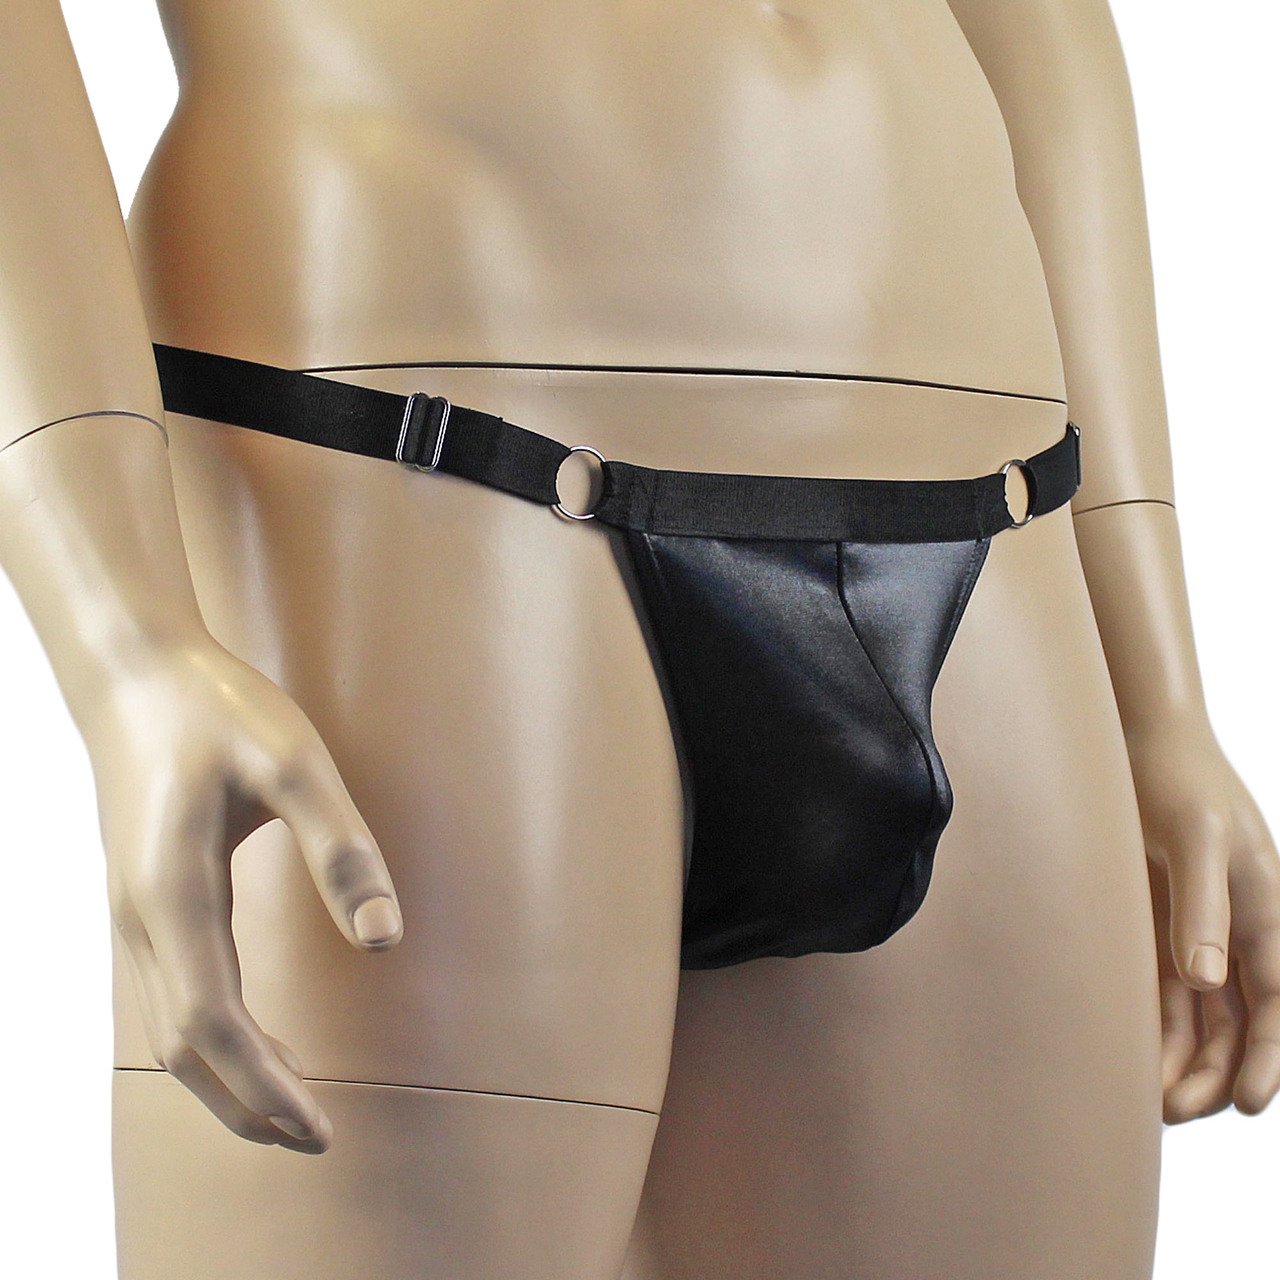 Male Oil Wetlook Thong with Rings Sides Black